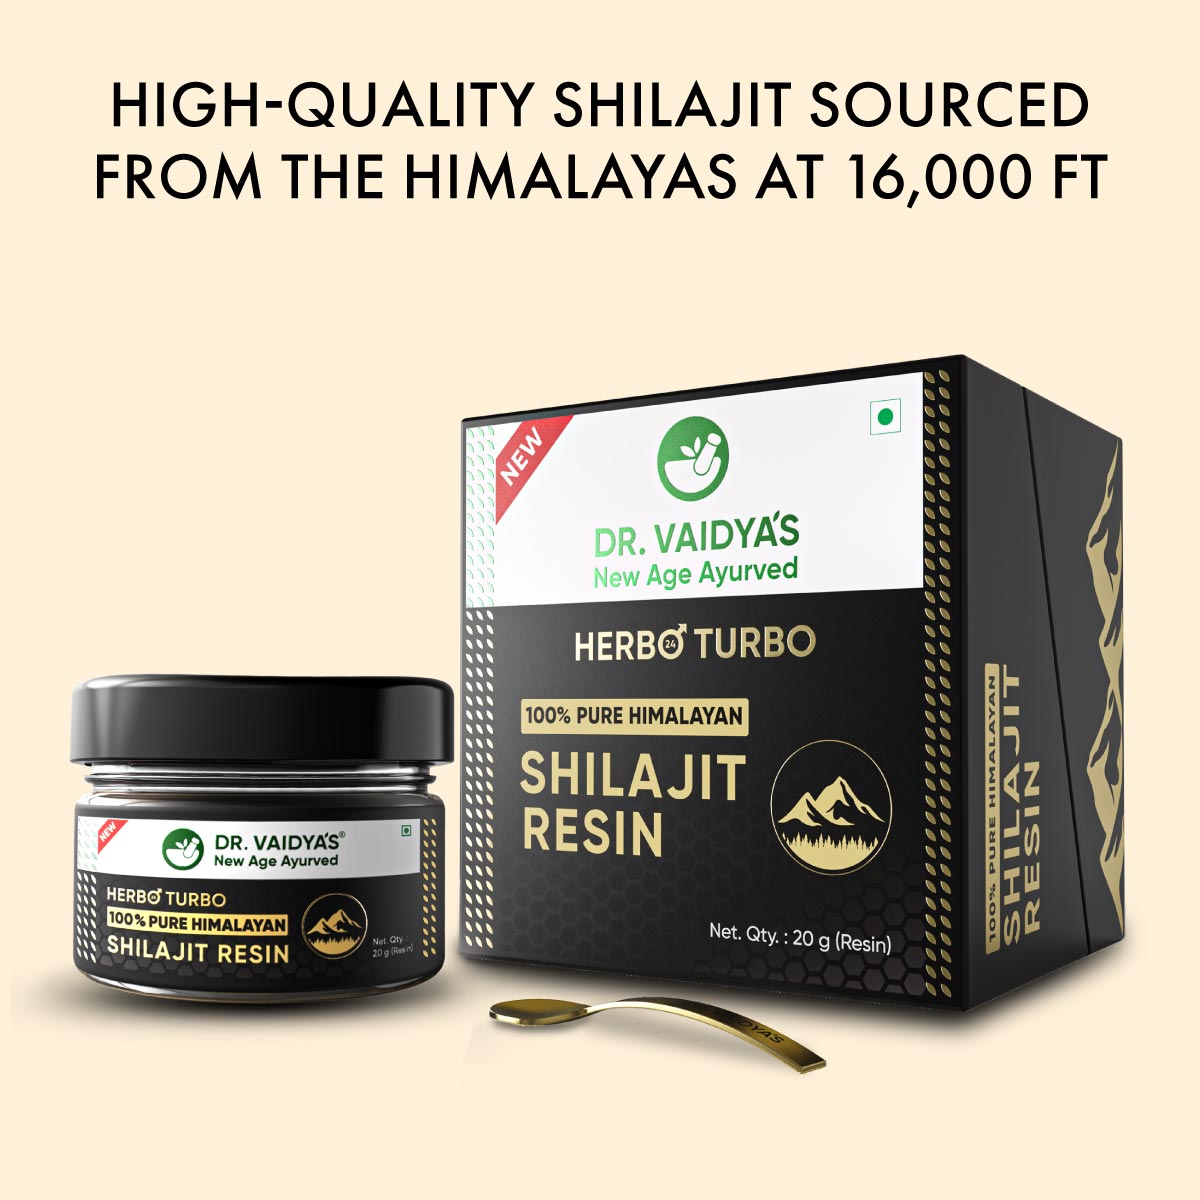 H24T Shilajit Resin: Made From 100% Pure Himalayan Shilajit To Help Boost Stamina, Strength & Energy